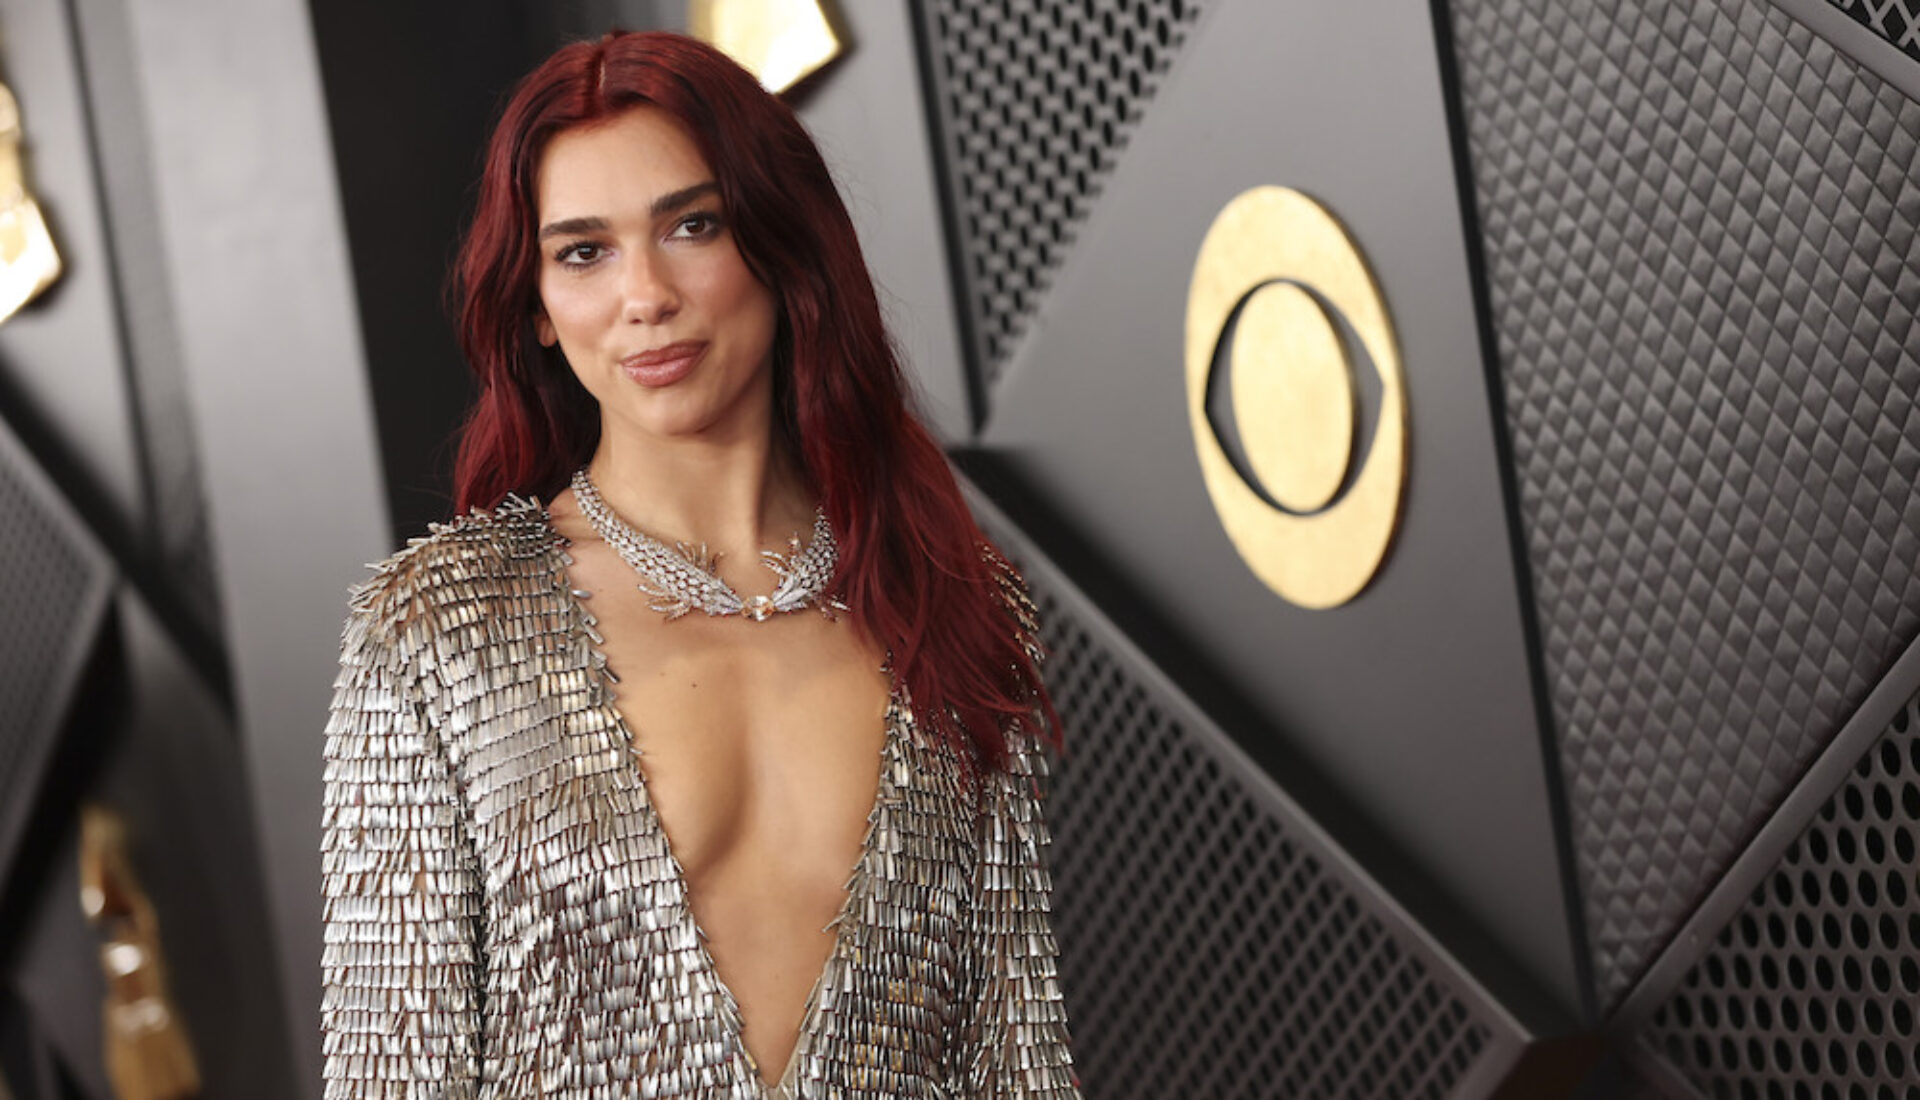 The over-50-year-old Glastonbury Festival announced the lineup for the festival, which includes Dua Lipa, Coldplay, SZA, Shania Twain, and Cindy Lauper